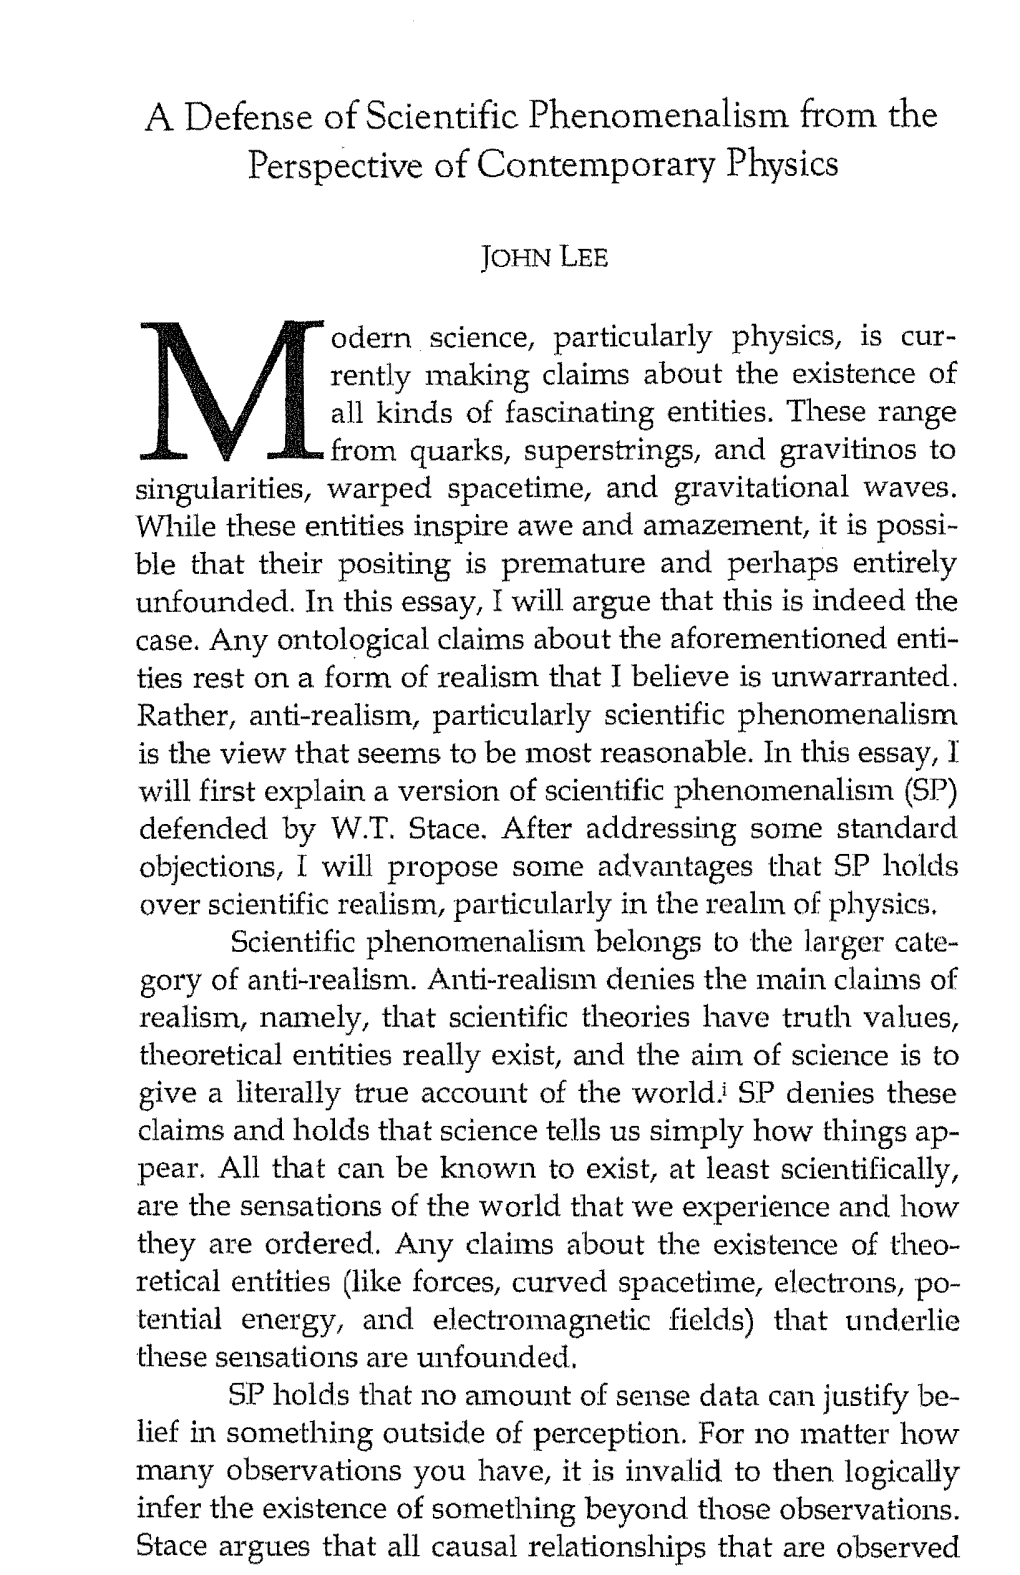 A Defense of Scientific Phenomenalism from the Perspective of Contemporary Physics